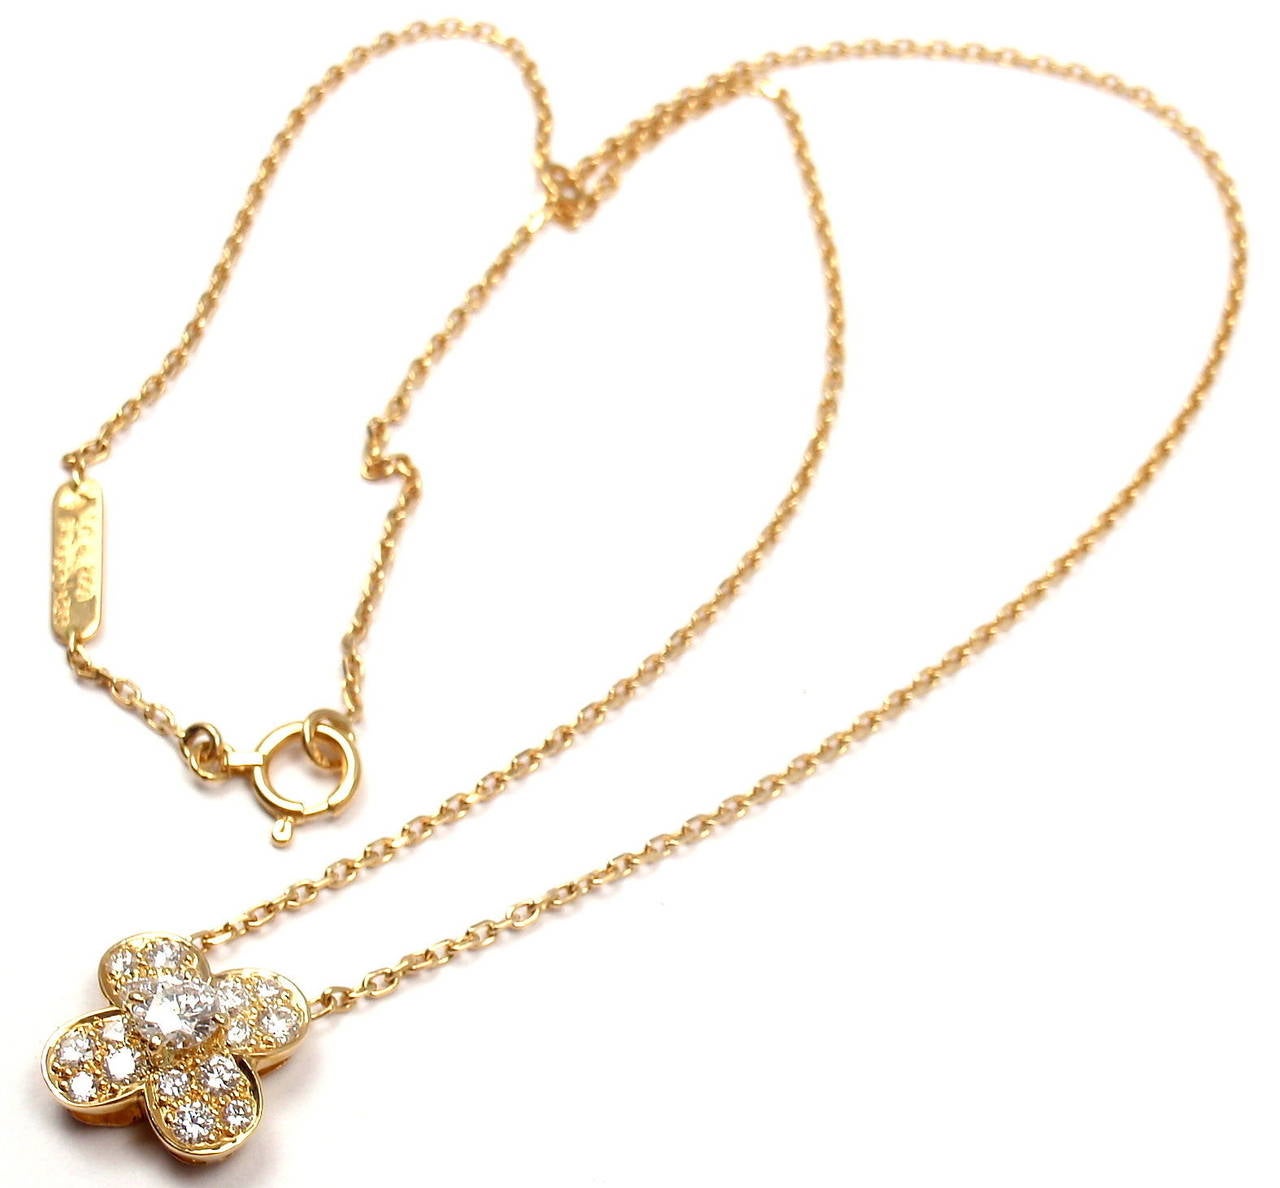 18k Yellow Gold Diamond Trefle Clover Alhambra Pendant Necklace by Van Cleef & Arpels.
With 17 brilliant round cut diamonds VVS clarity, F color
Total weight .50ctw

Details:
Length: 16'' necklace
Alhambra: 11mm x 11mm
Weight: 4.5